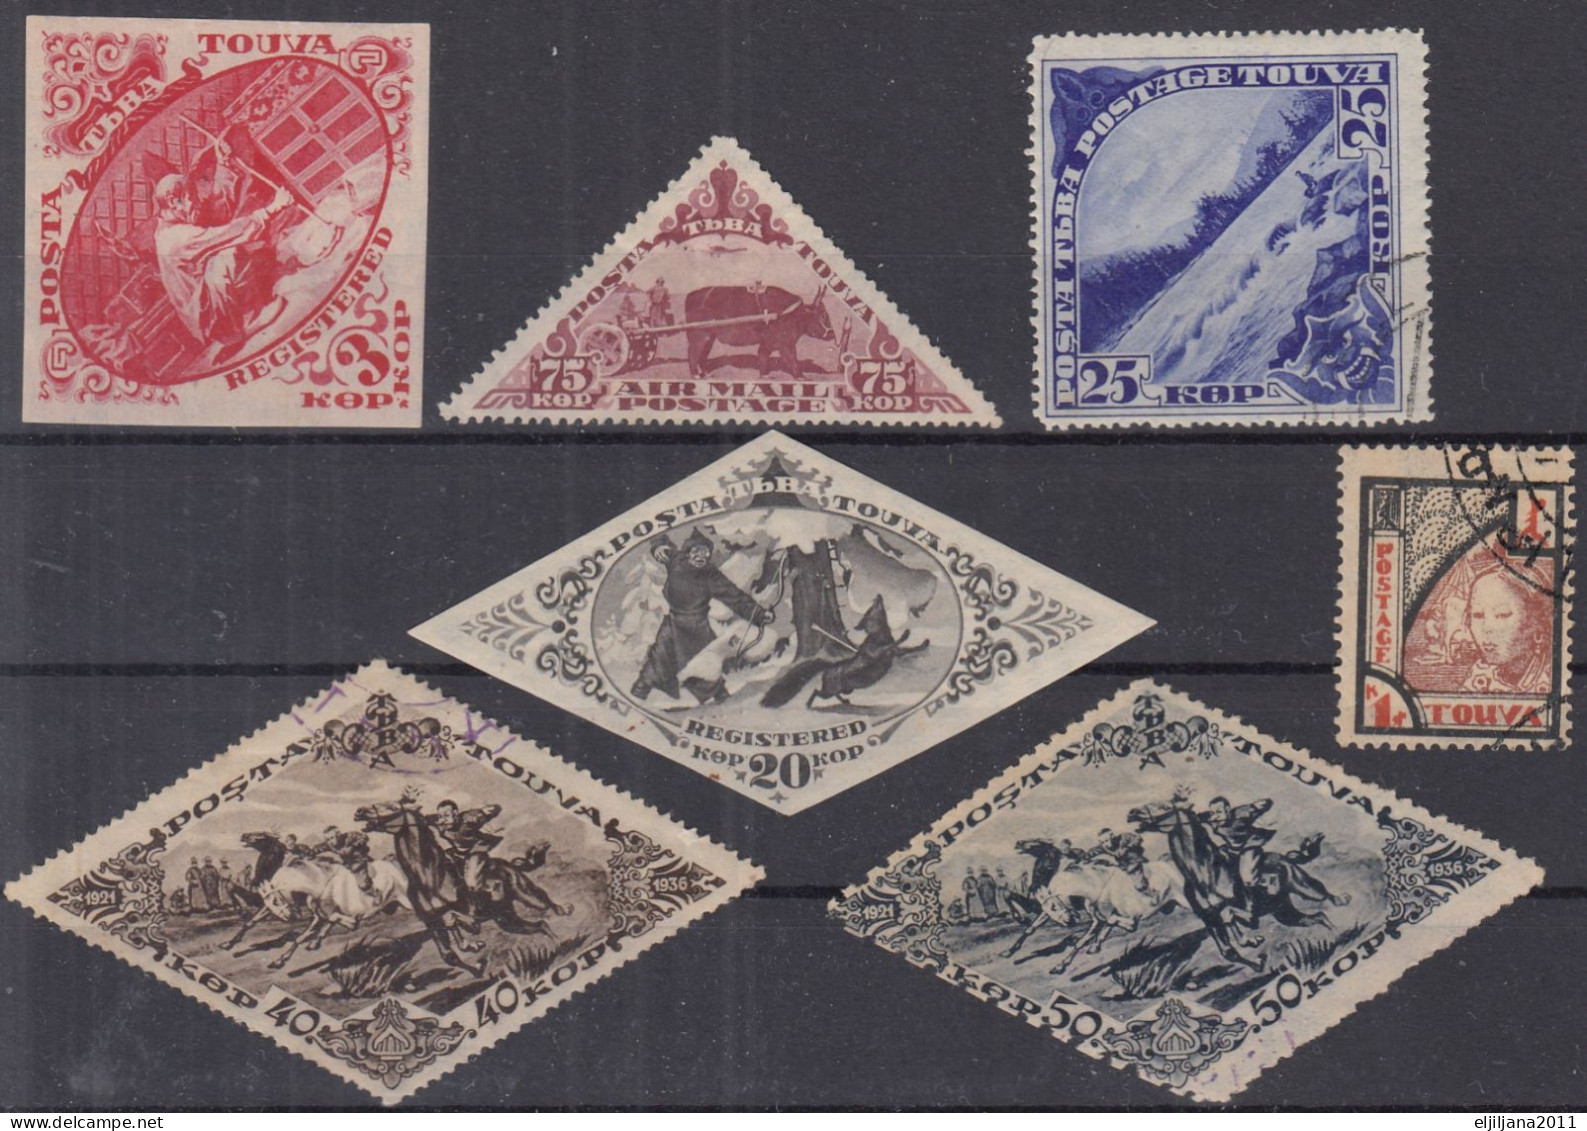 SALE !! 50 % OFF !! ⁕ TOUVA Tannu-Tuva (Northern Mongolia) ⁕ Collection From 1927 - 1936 ⁕ 7v MH & Used - Scan - Toeva